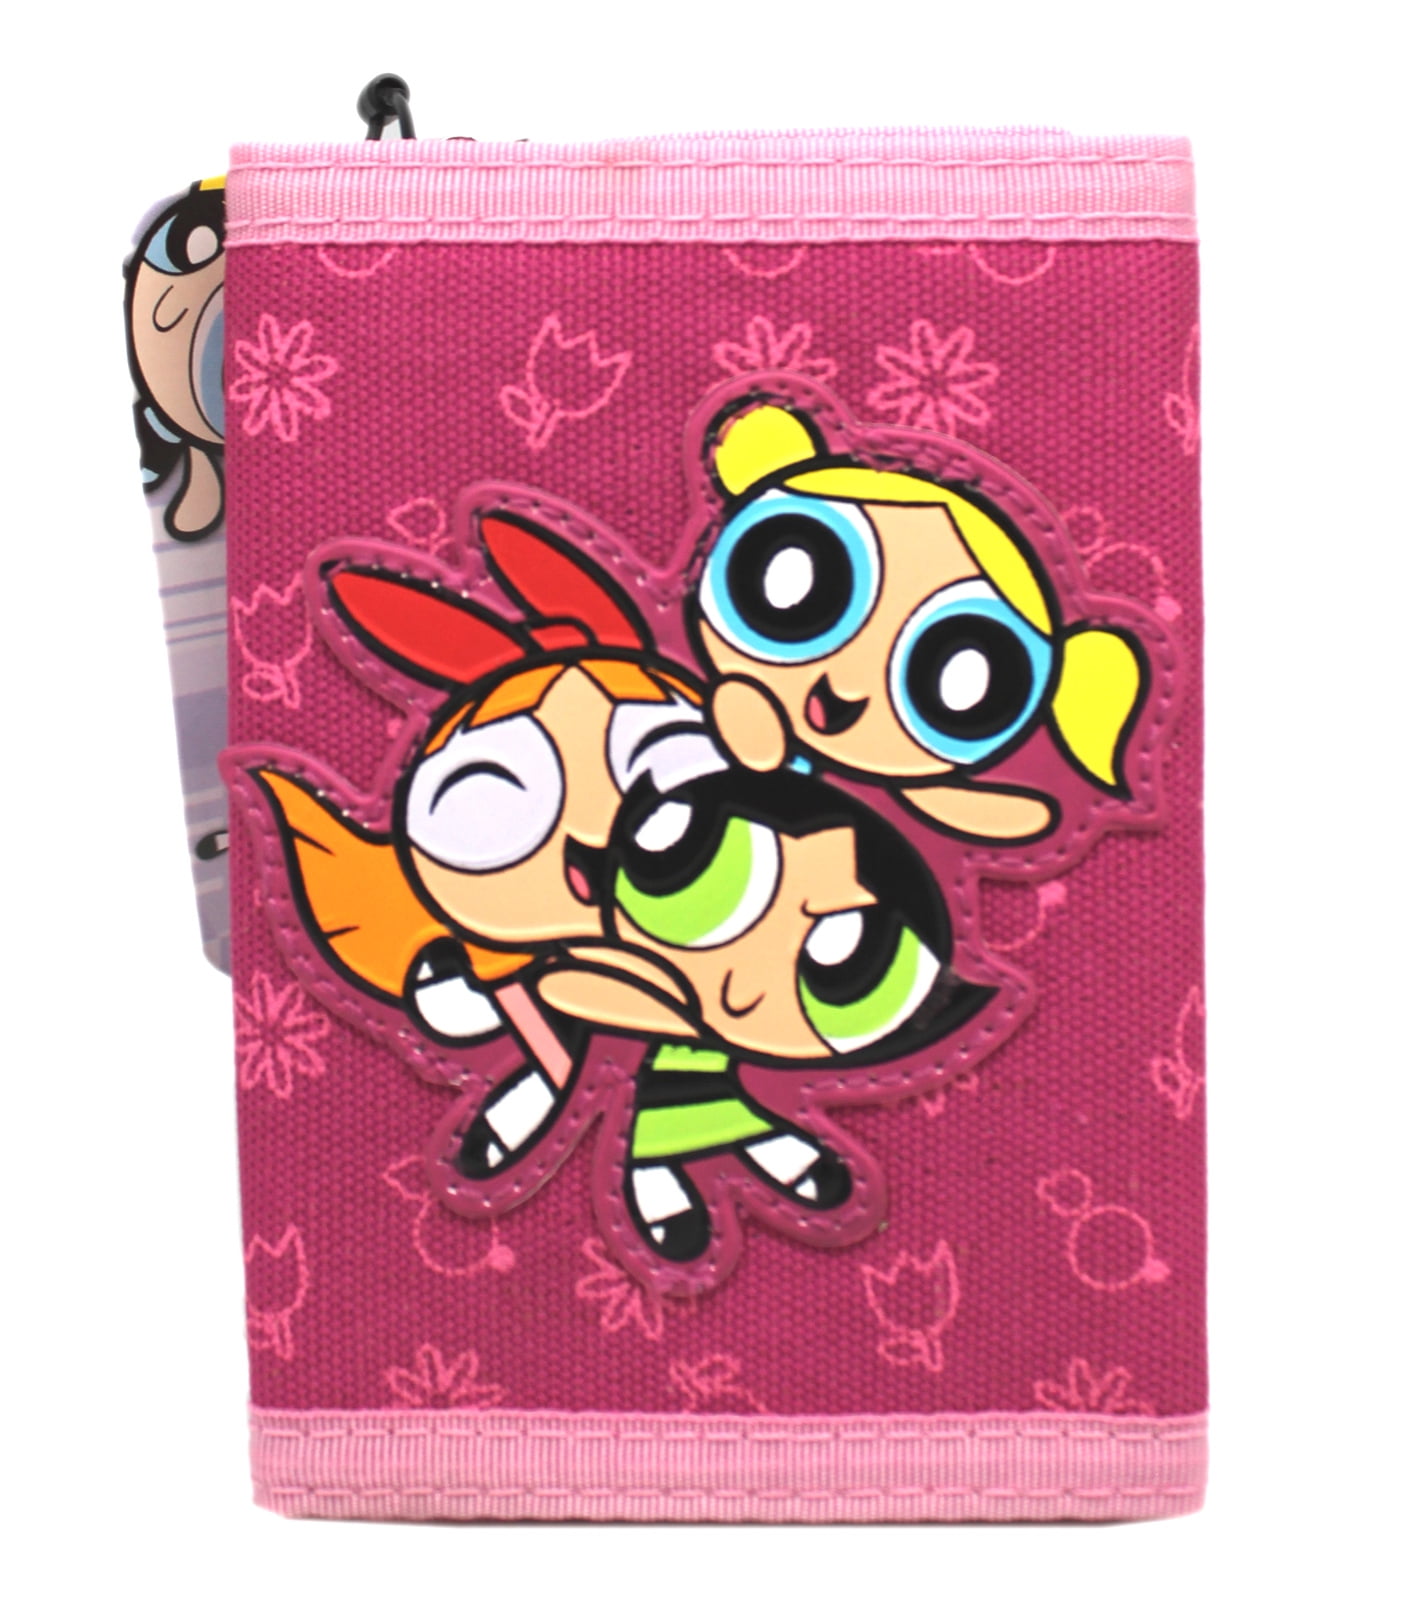 Scooby-Doo Tri-Fold Wallet 4.5" x 3.25" DARK PINK BRAND NEW WITH TAGS